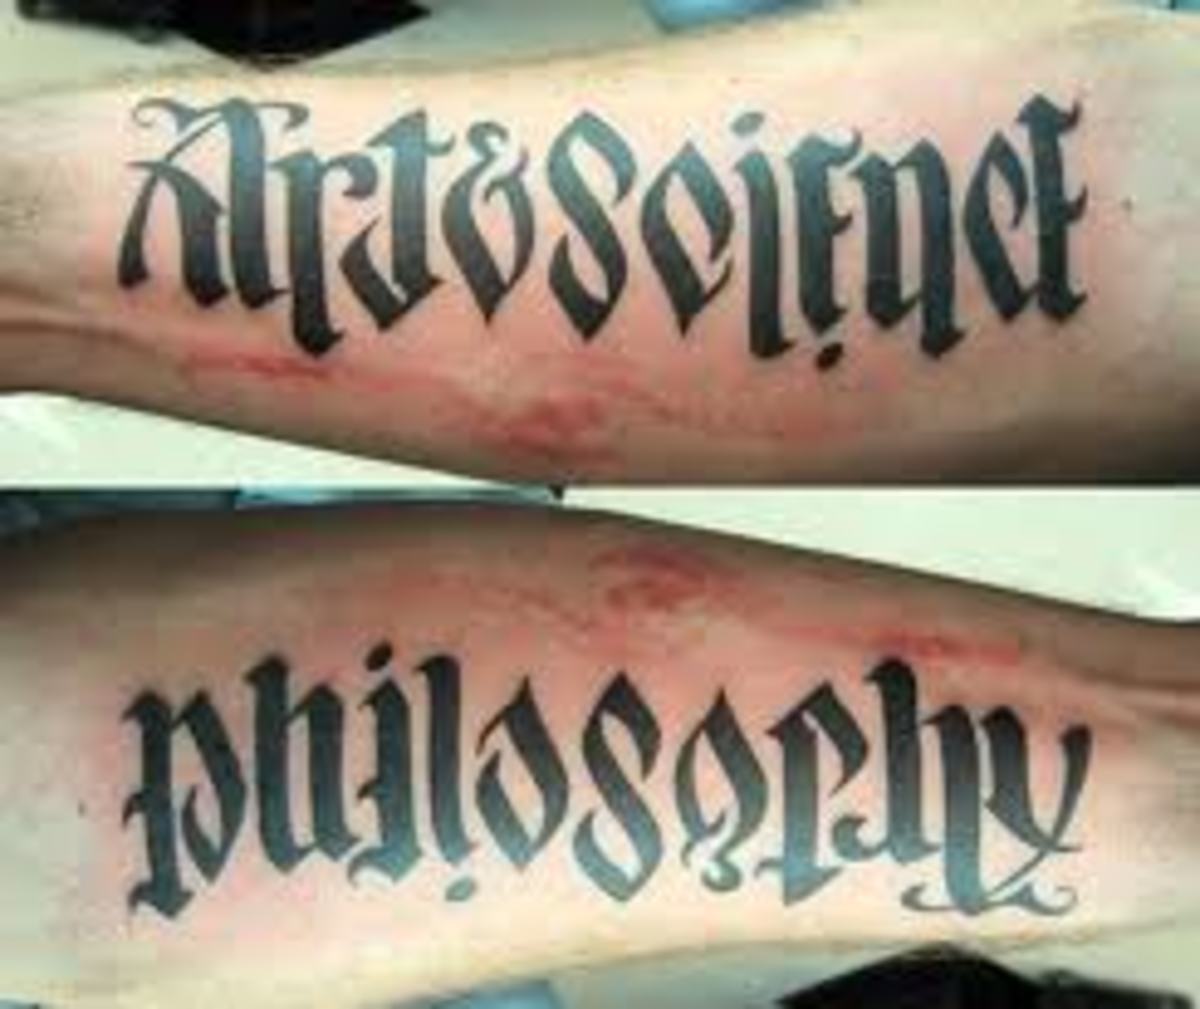 ambigram-tattoo-designs-and-meanings-ambigram-tattoo-ideas